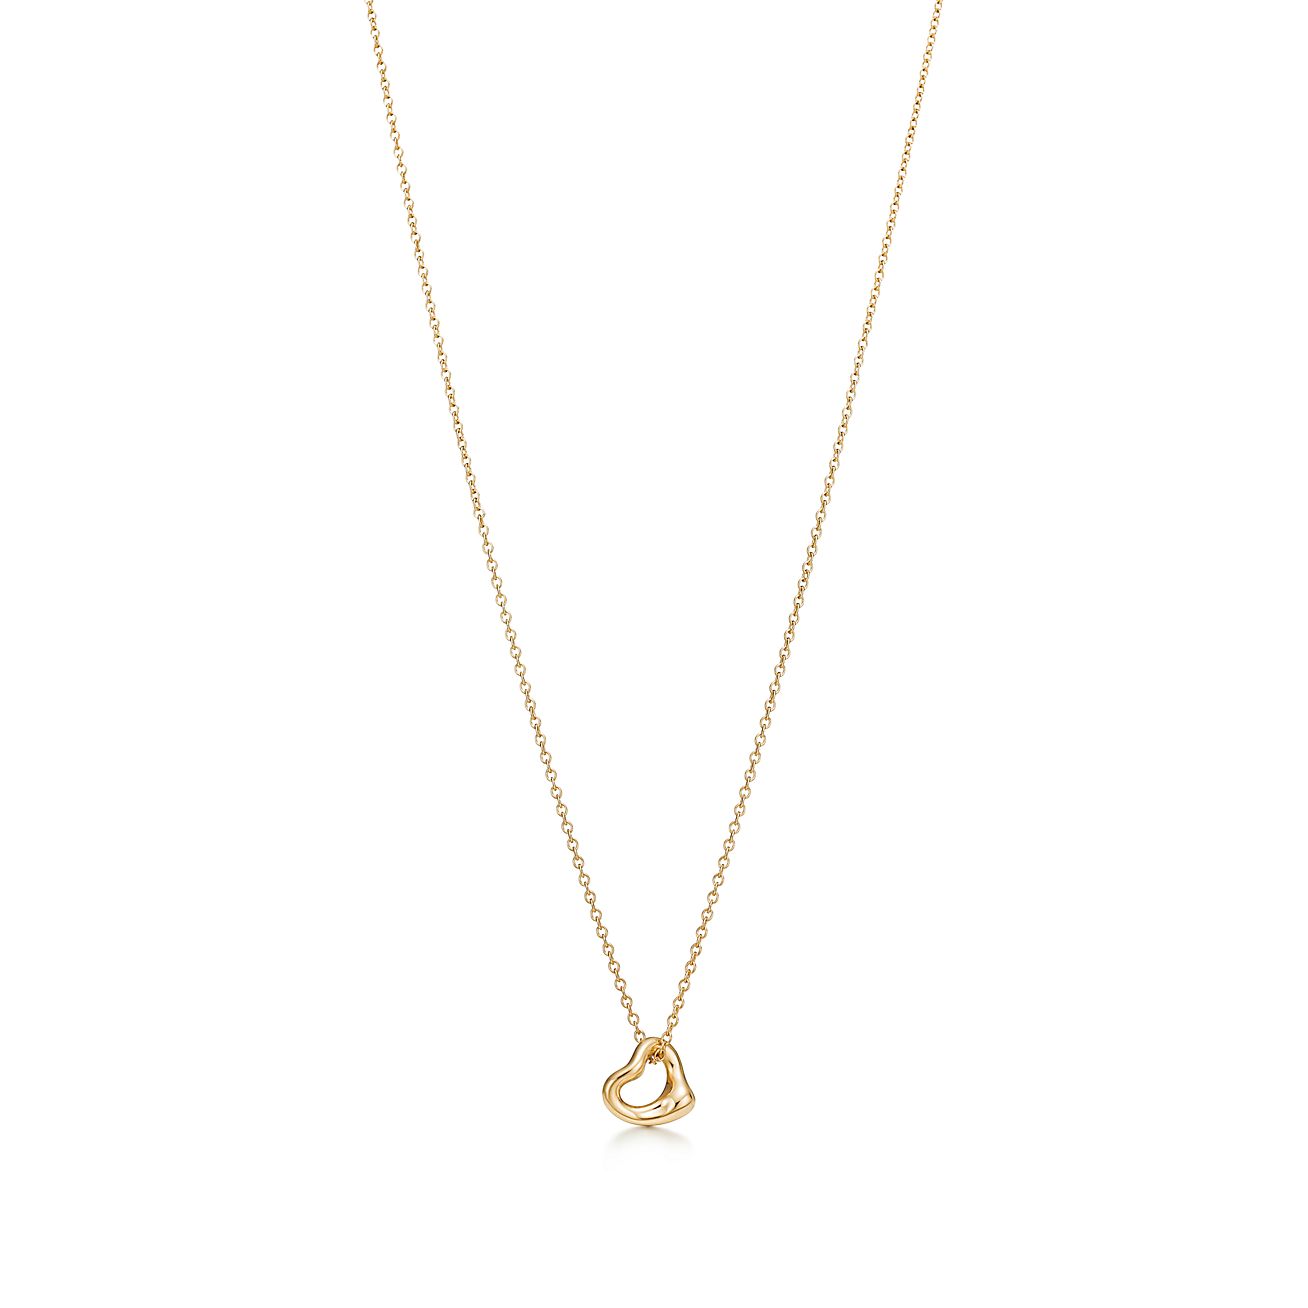 Details about   14k Yellow Gold Love Necklace